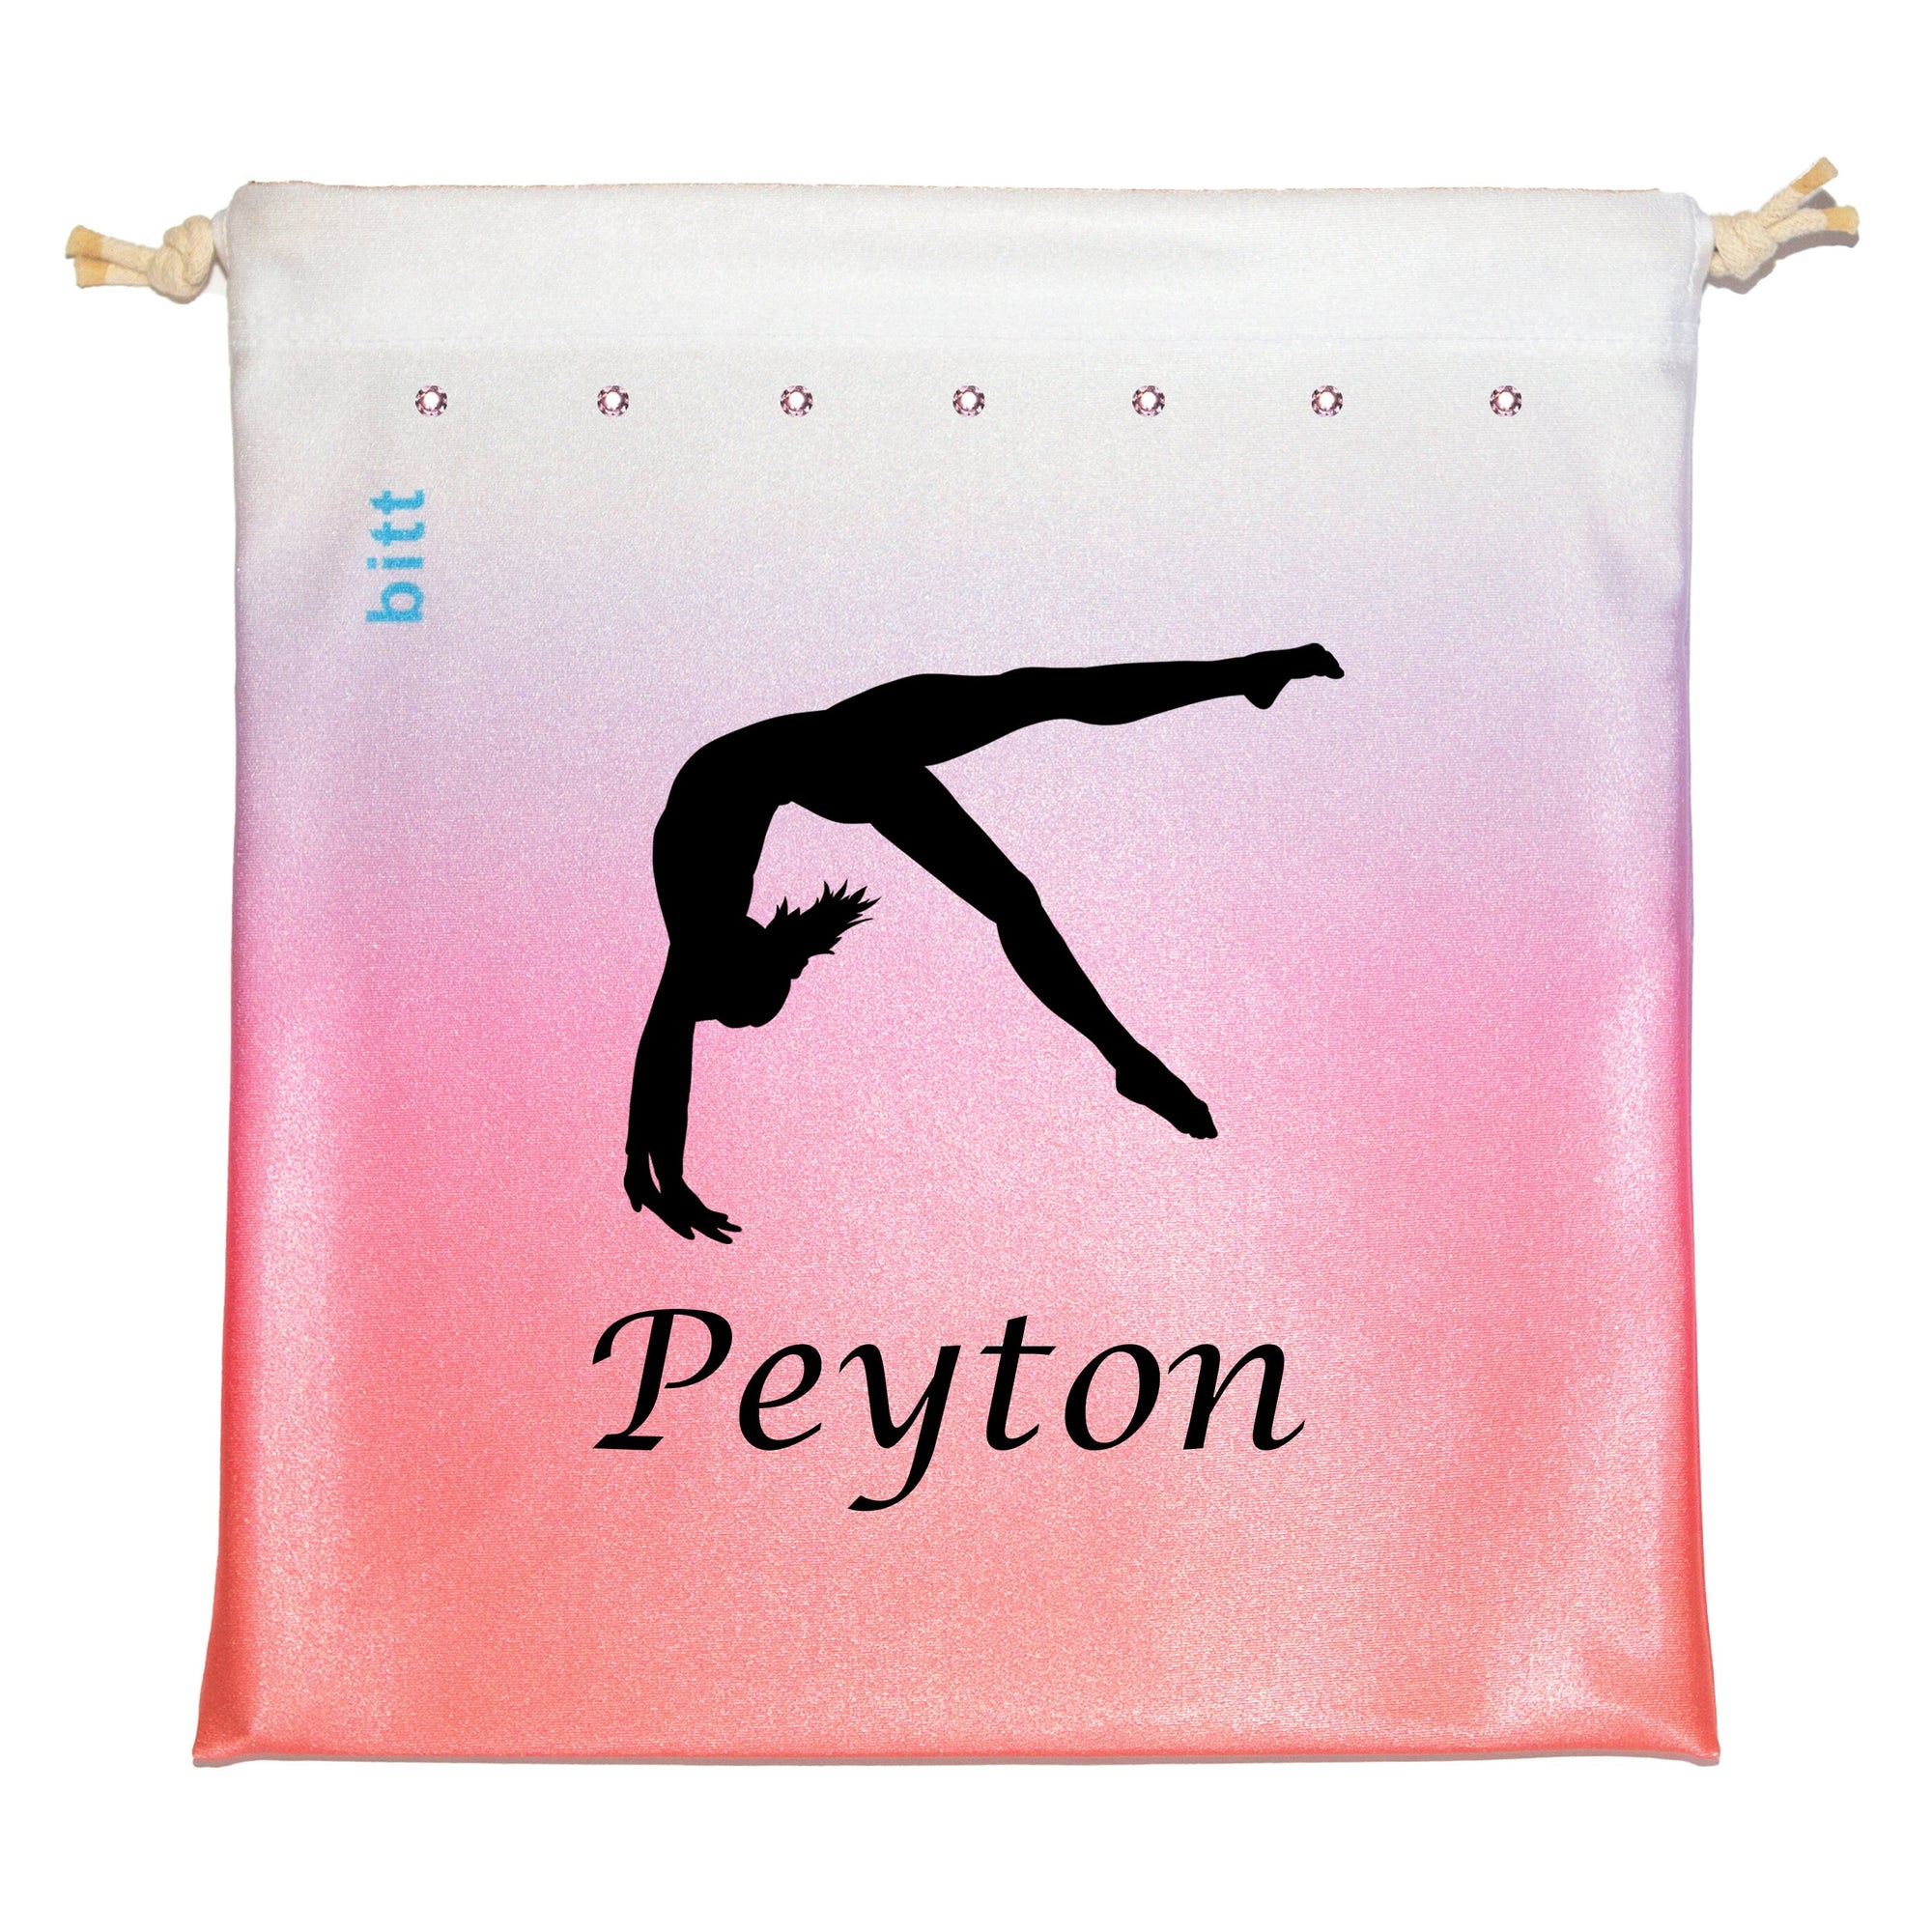 Personlized Gymnastics Grip Bag with Back Handspring in Coral, Purple, White Ombre